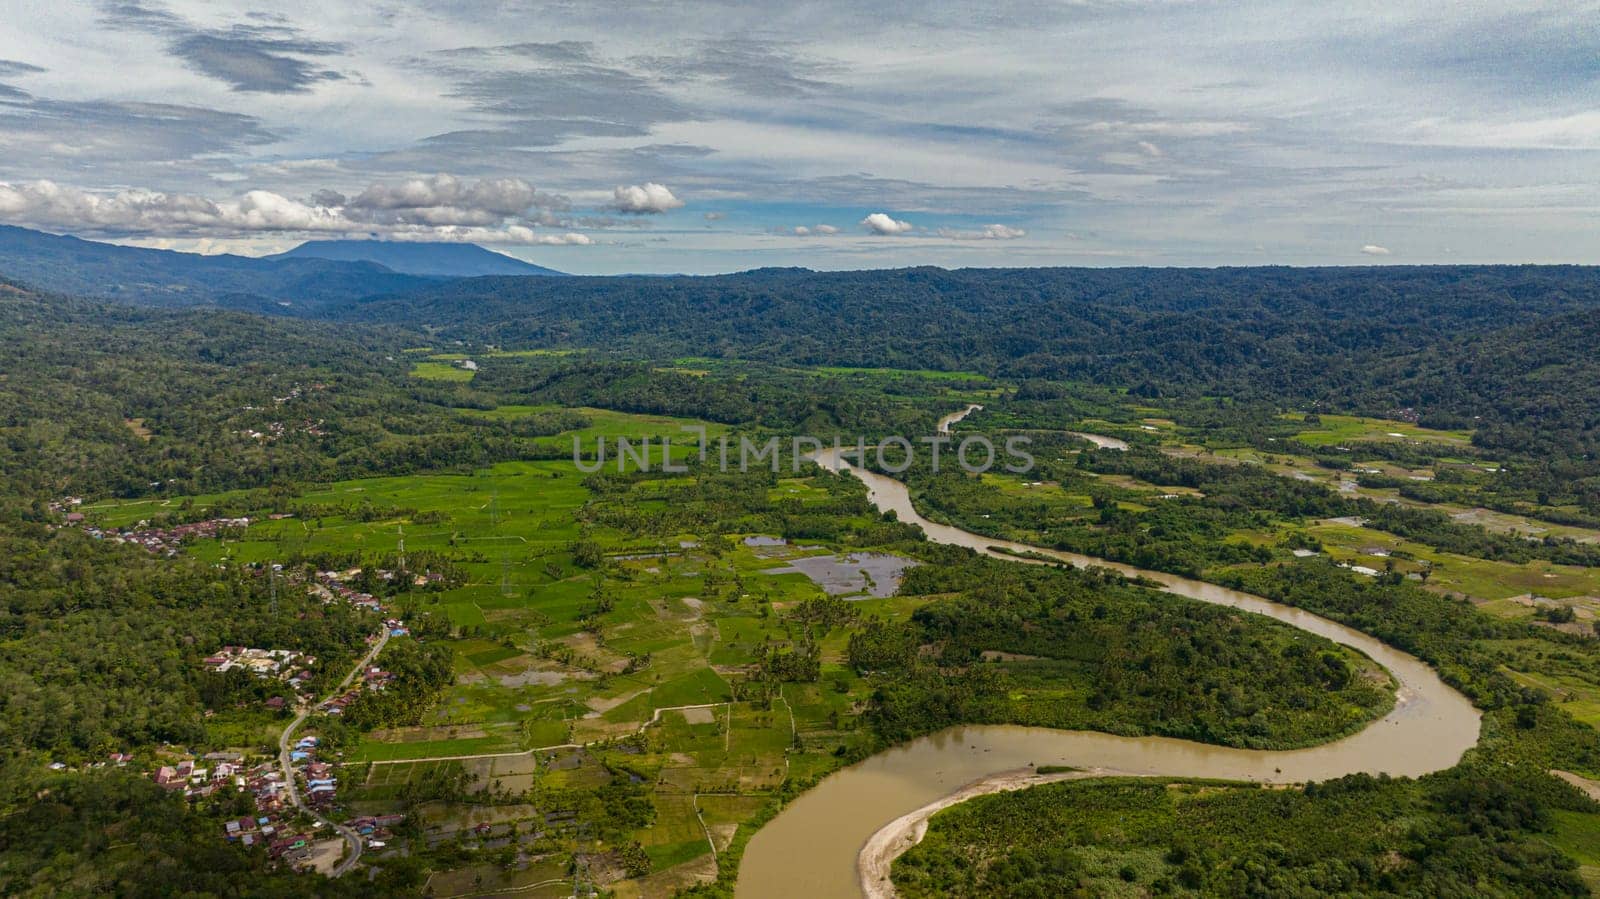 Valley with farmland and rice fields in the highlands. Sumatra, Indonesia.